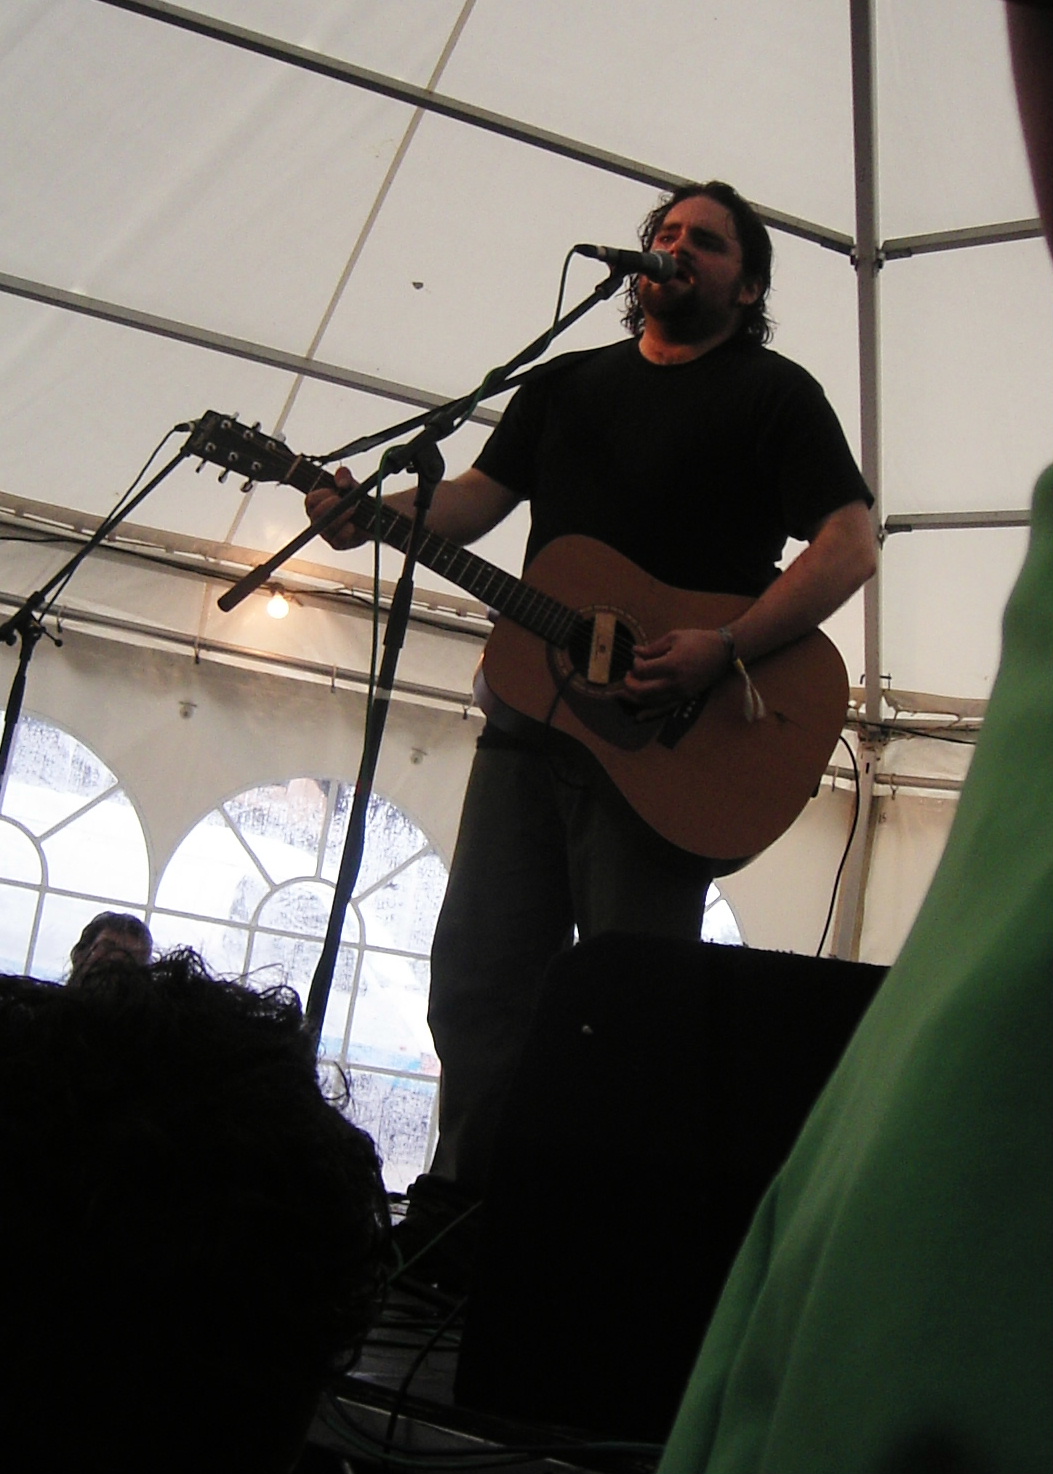 the man is playing the guitar in front of a crowd